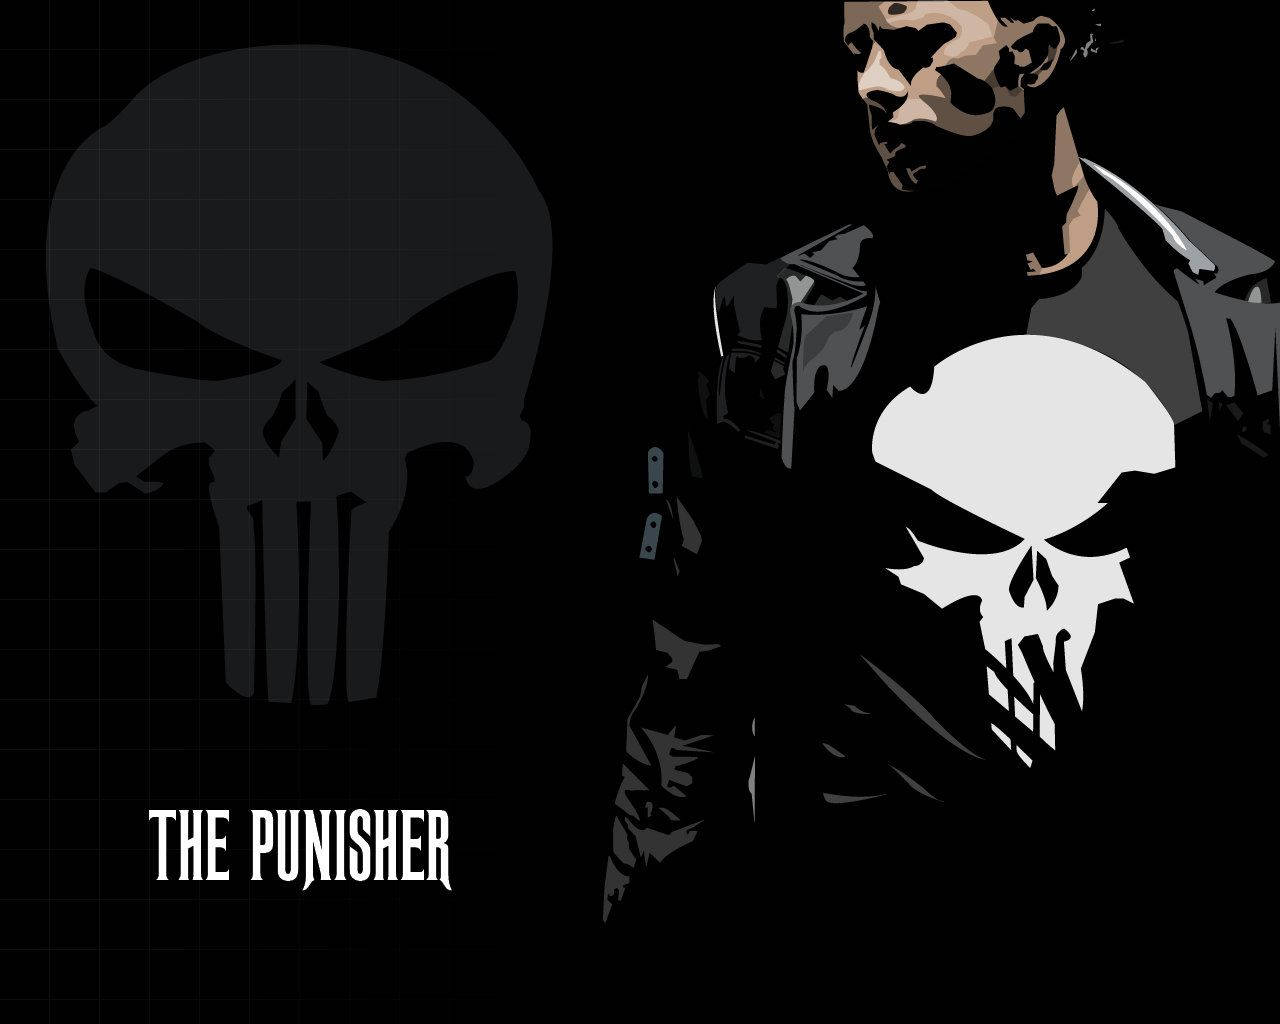 The Punisher Logo And Frank Castle Background